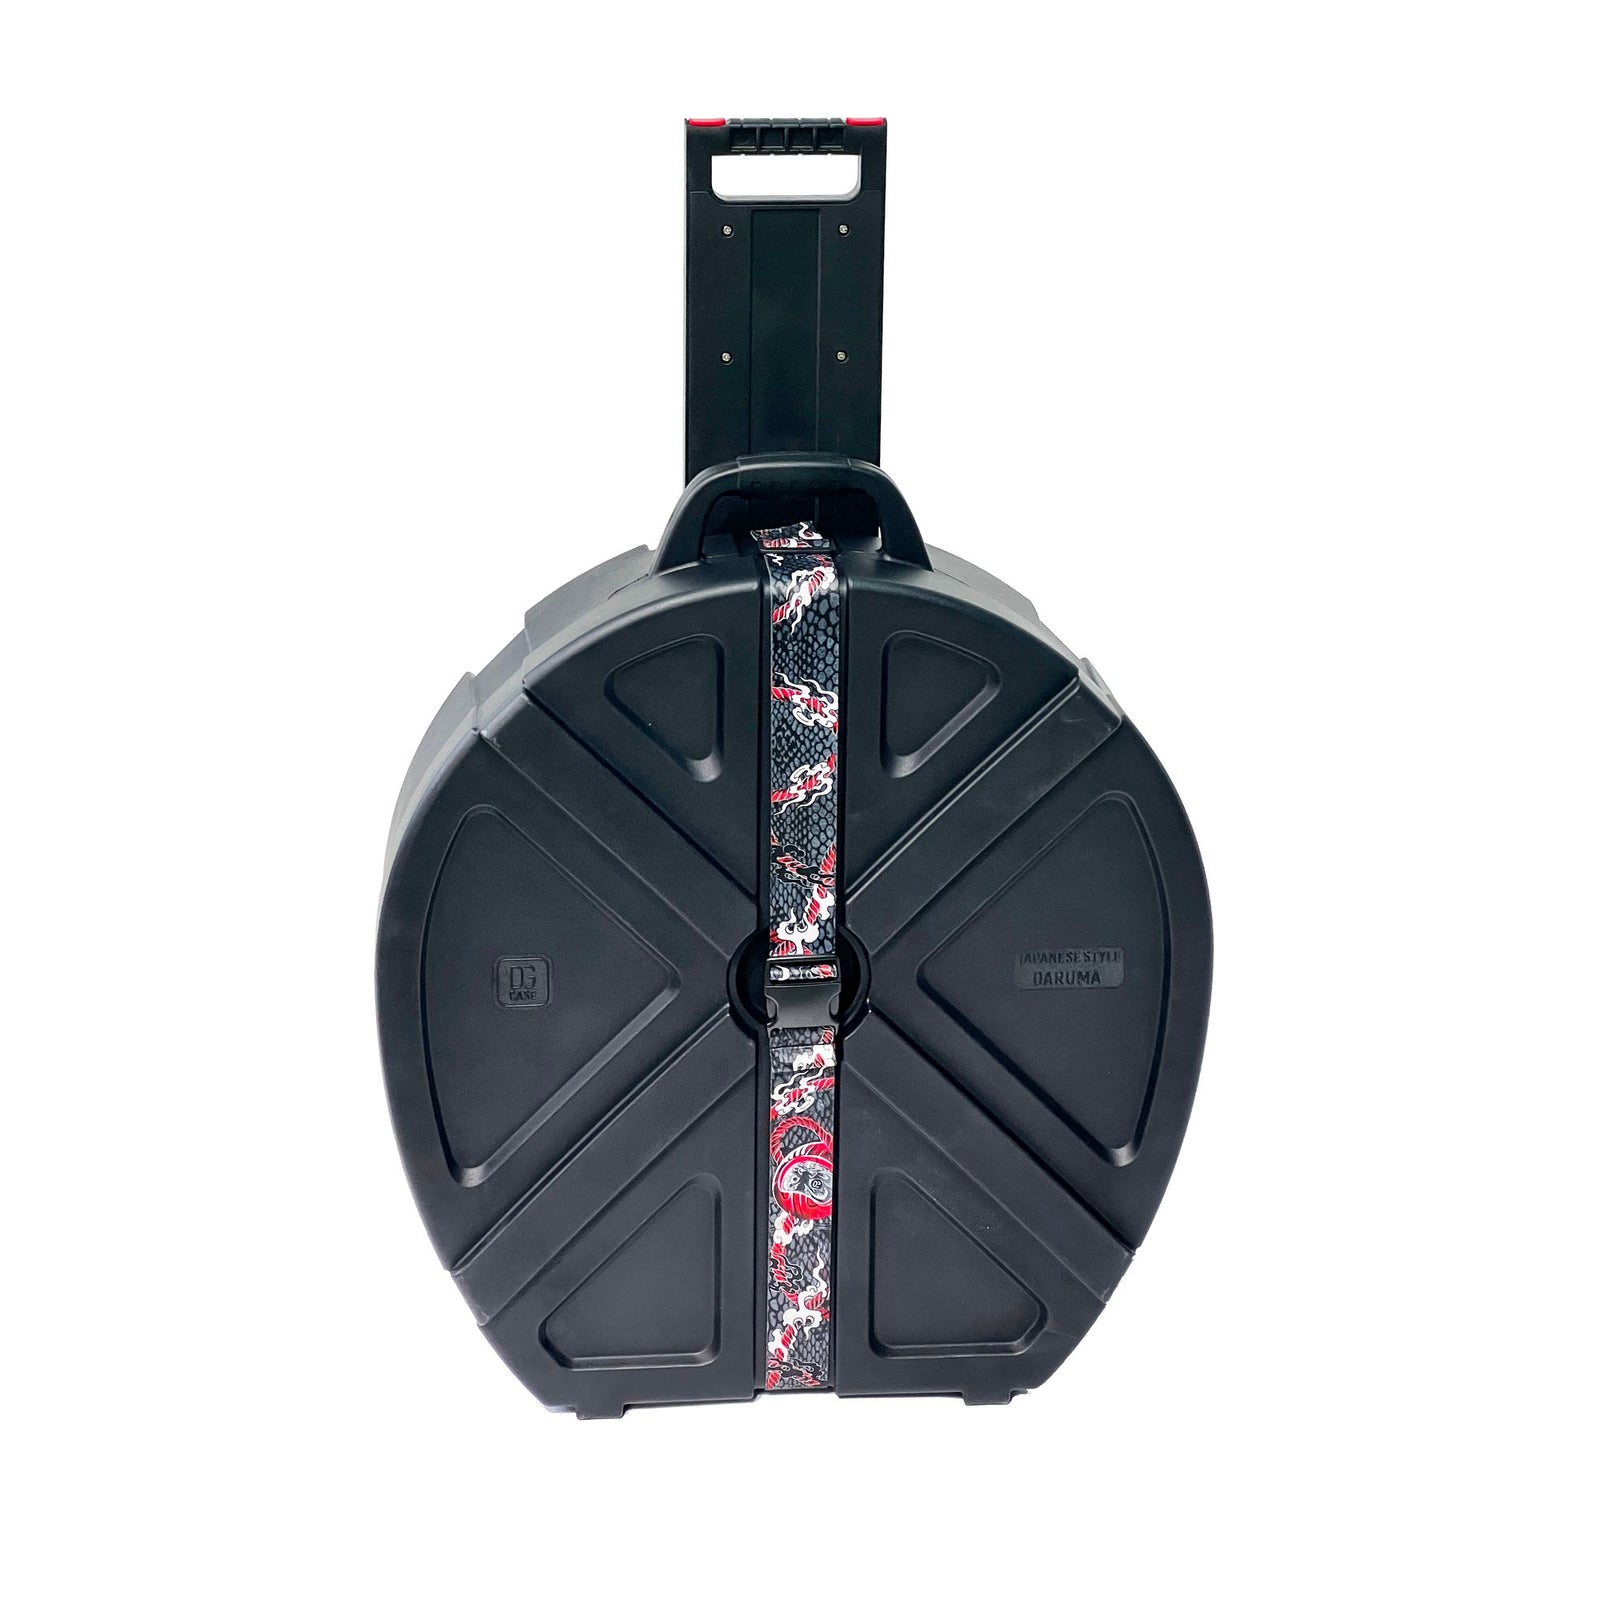 24" in Cymbal HardCase - usefull for Cymbals & Round Drum Shield (DARUMA24-01A-BLACK)